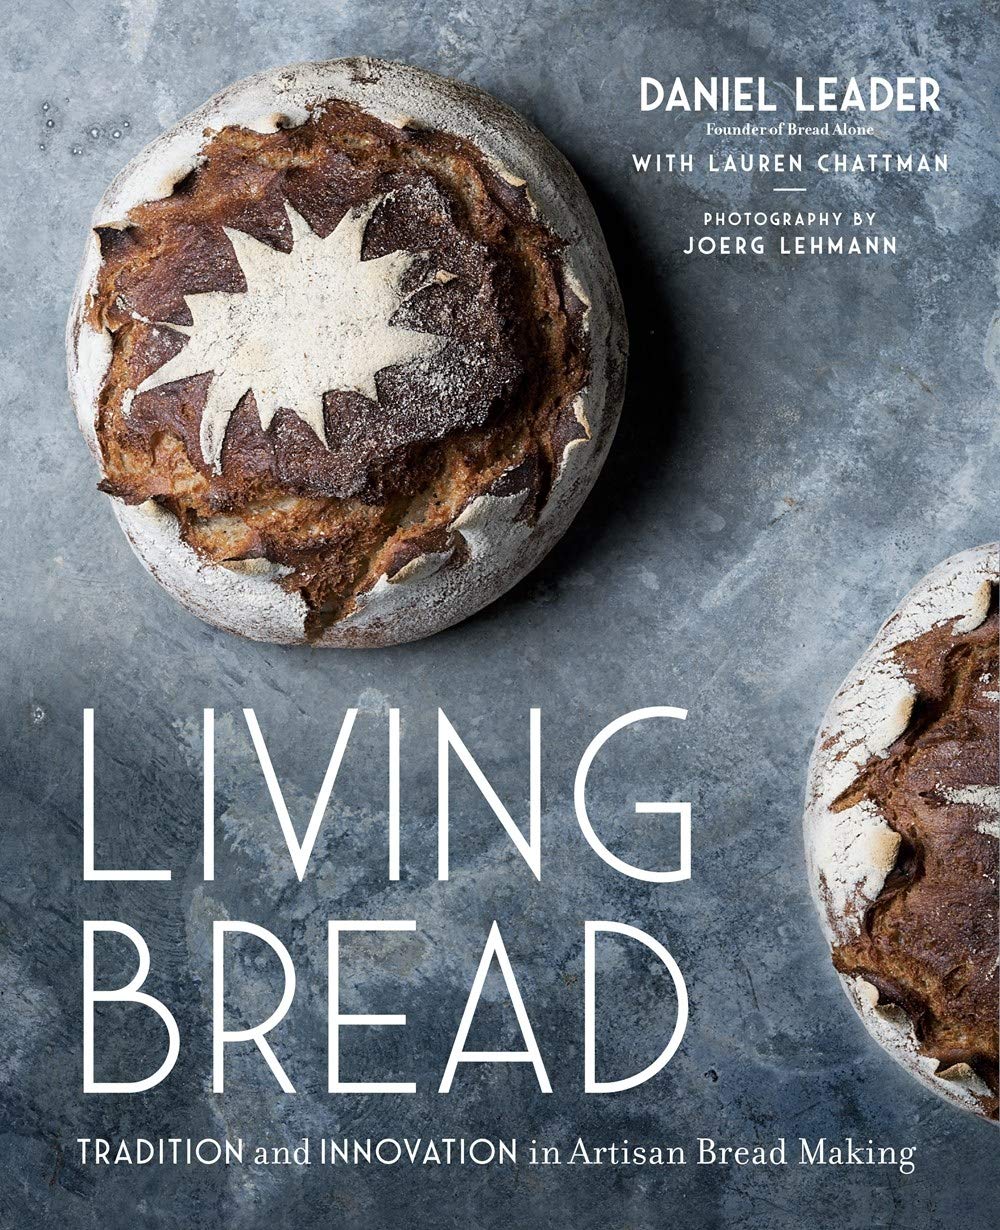 Living Bread: Tradition and Innovation in Artisan Bread Making (Daniel Leader)